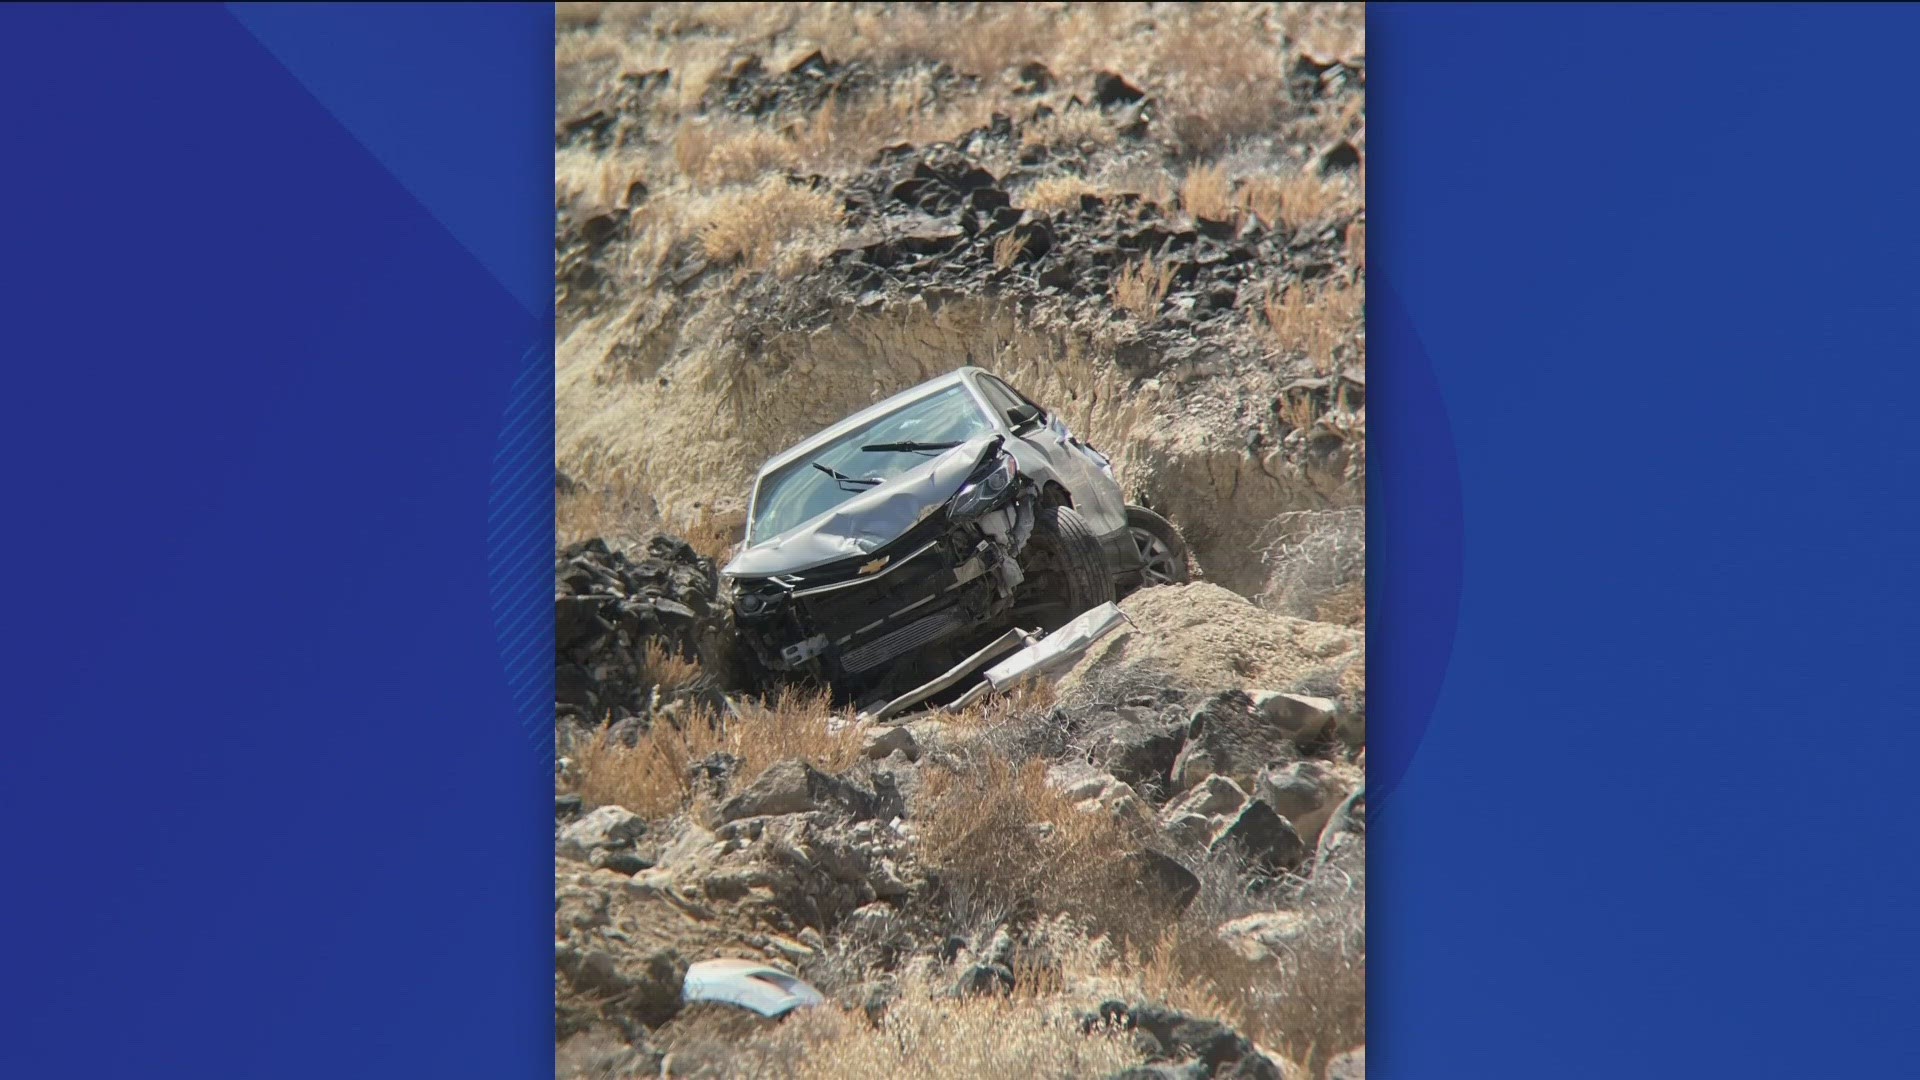 Police said she was located in a remote area in Canyon County and was taken to the hospital.